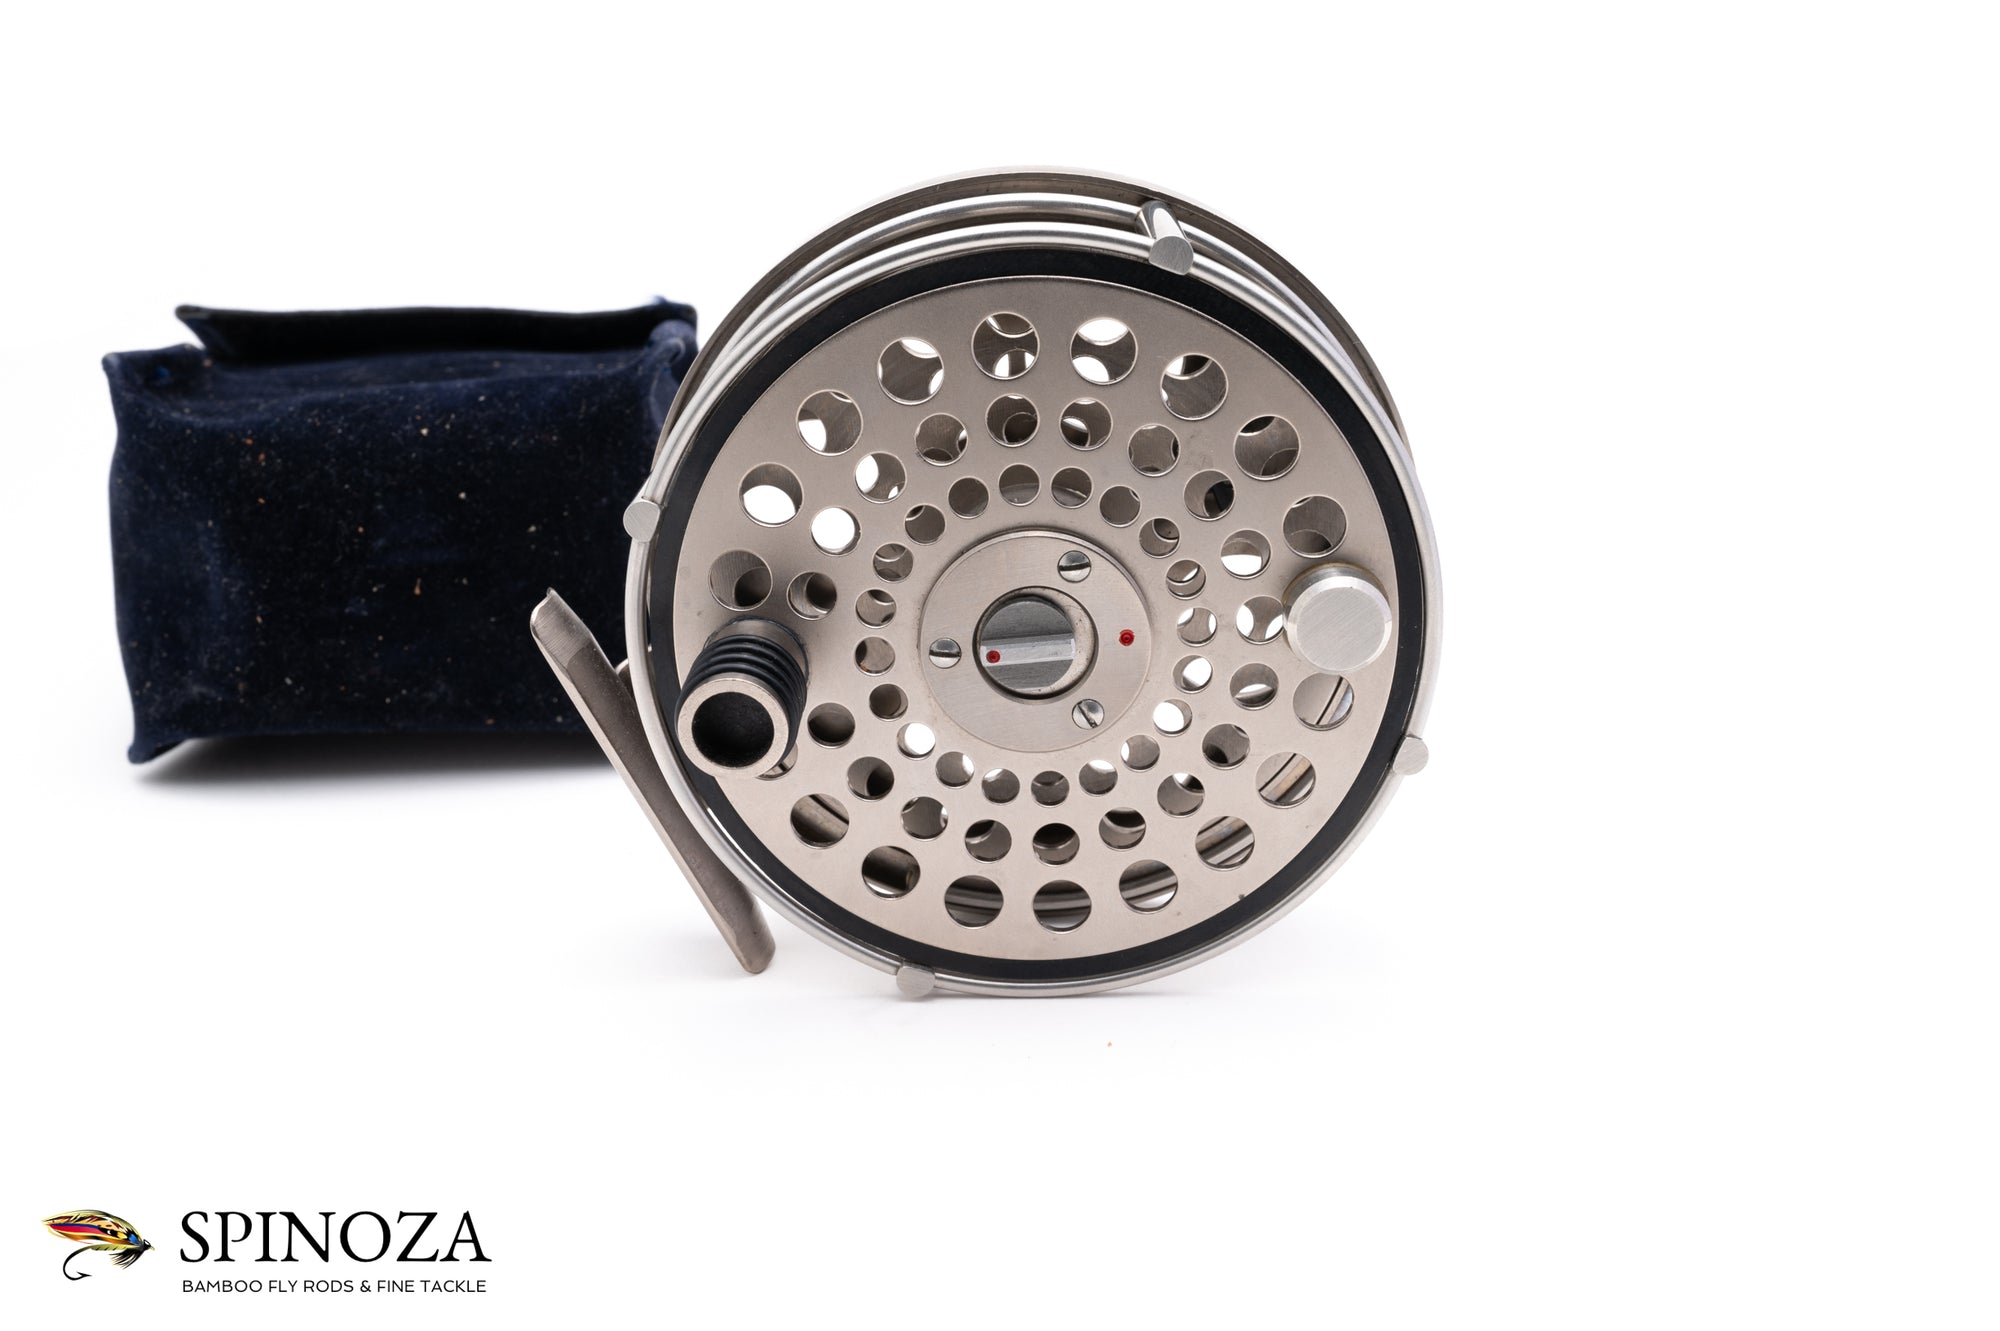 The Shakespeare magnesium fly reels - Page 2 - The Classic Fly Rod